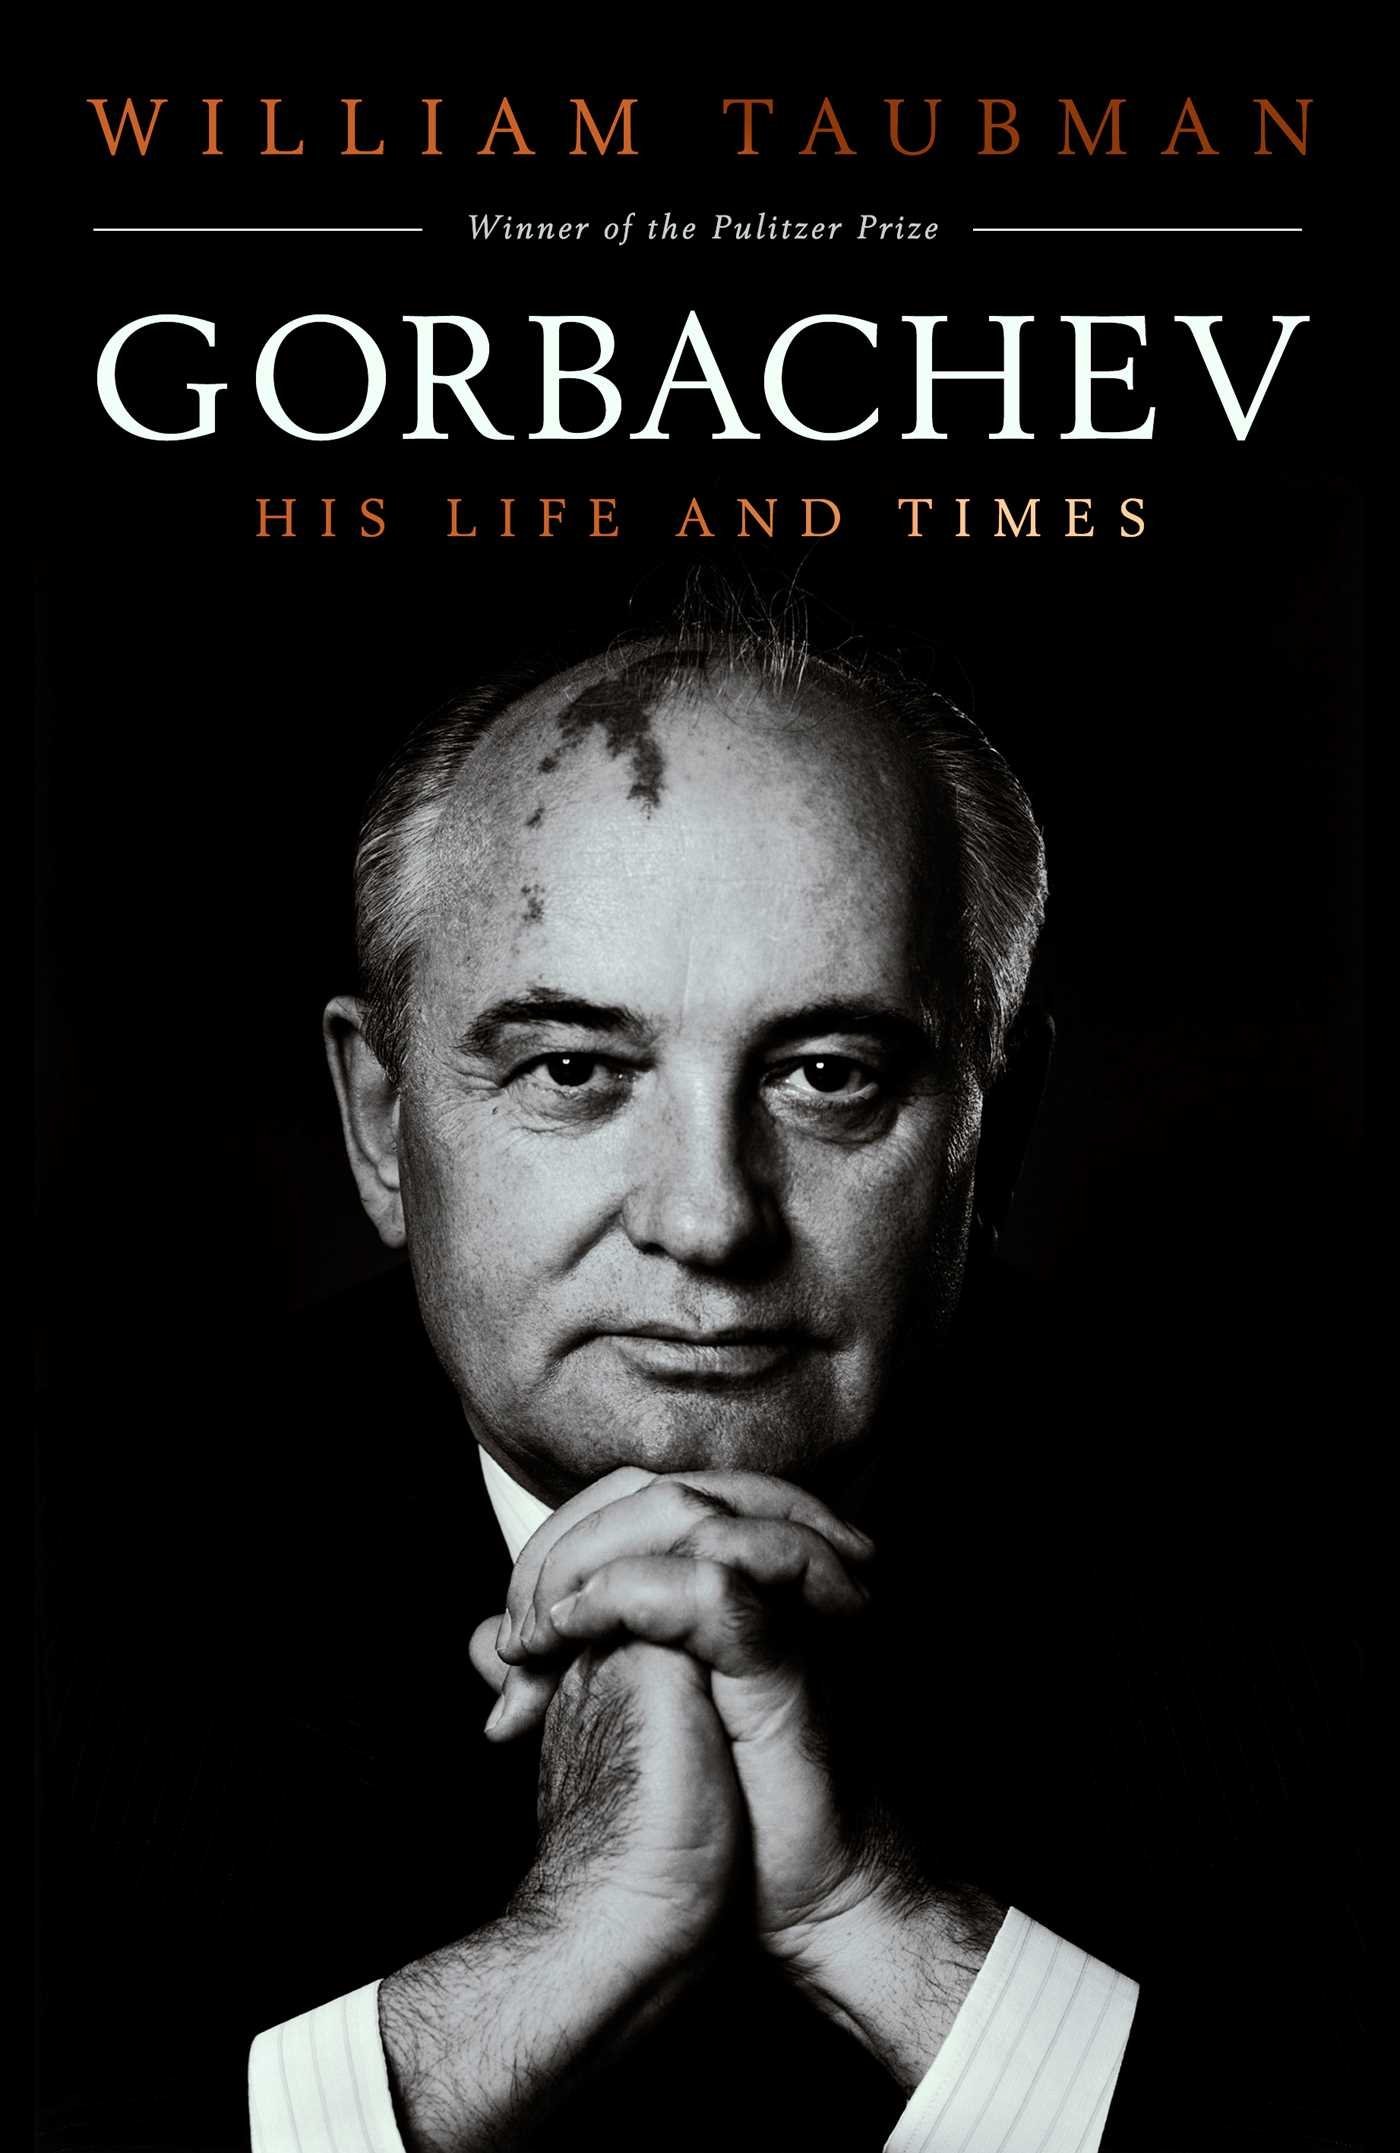 gorbachev meme What were some important people in the cold war?